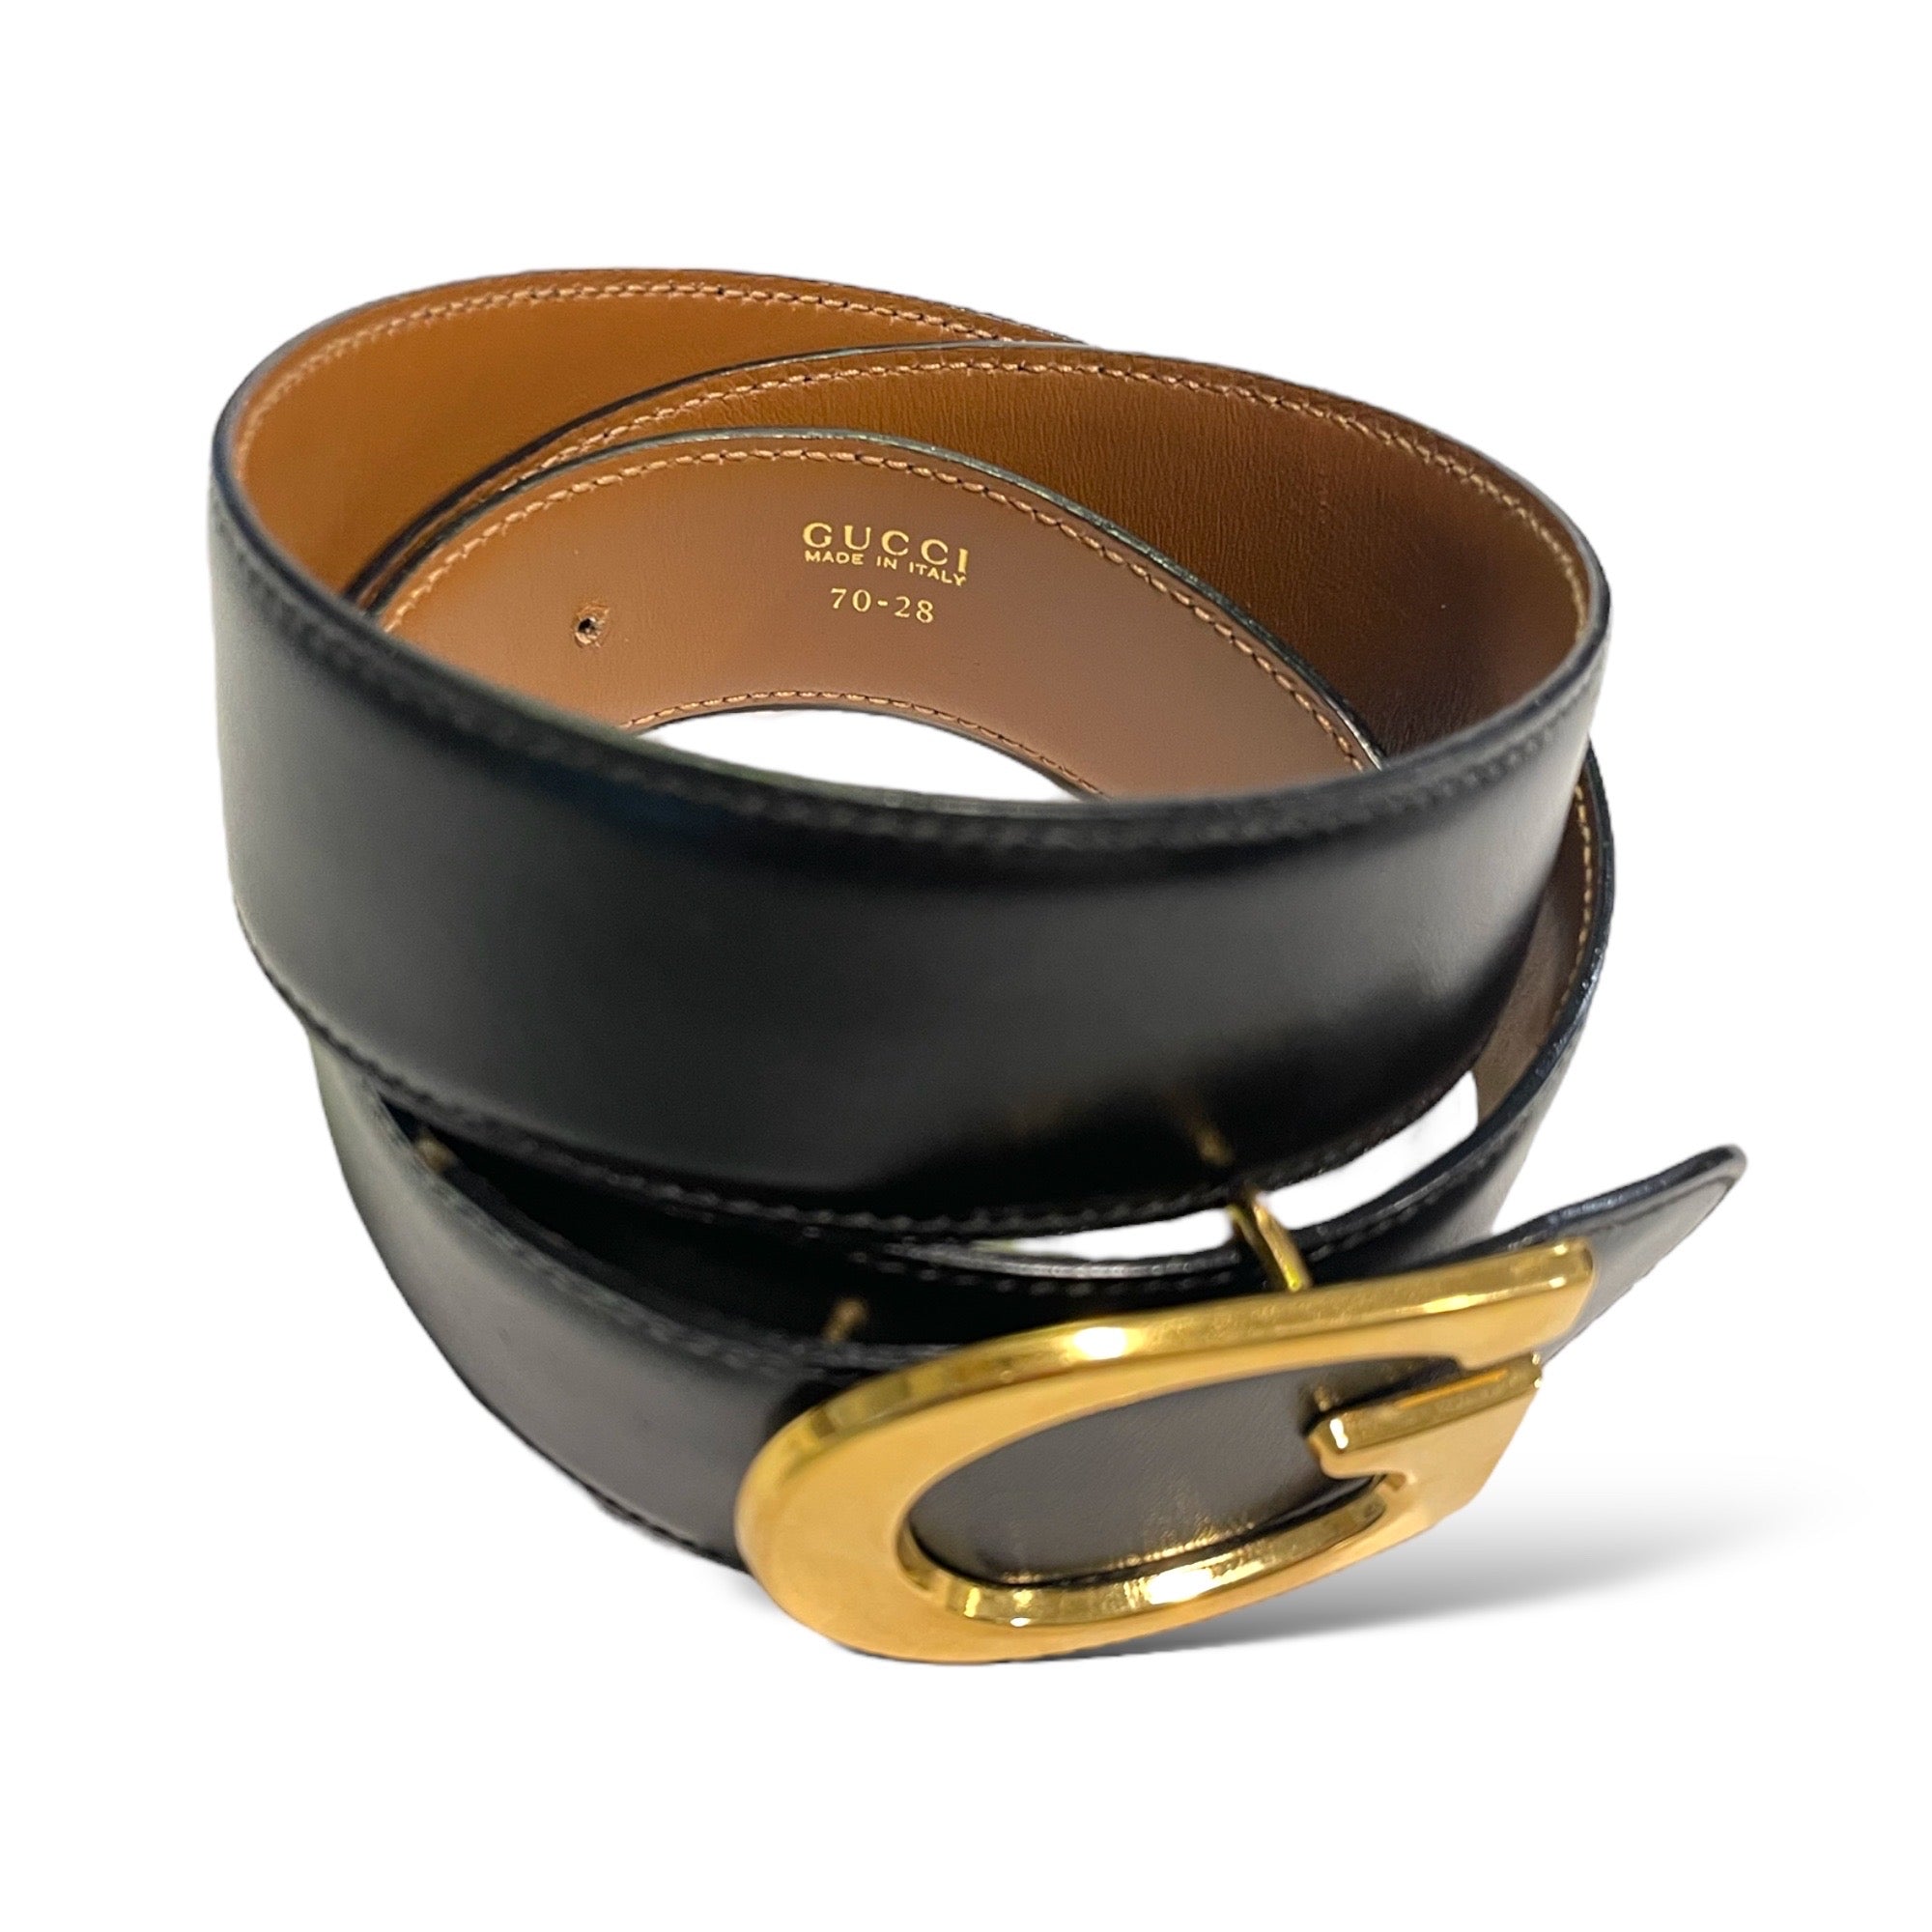 GUCCI Vintage Leather Belt with Removable Gold-Tone G Buckle |Size: 70/28|